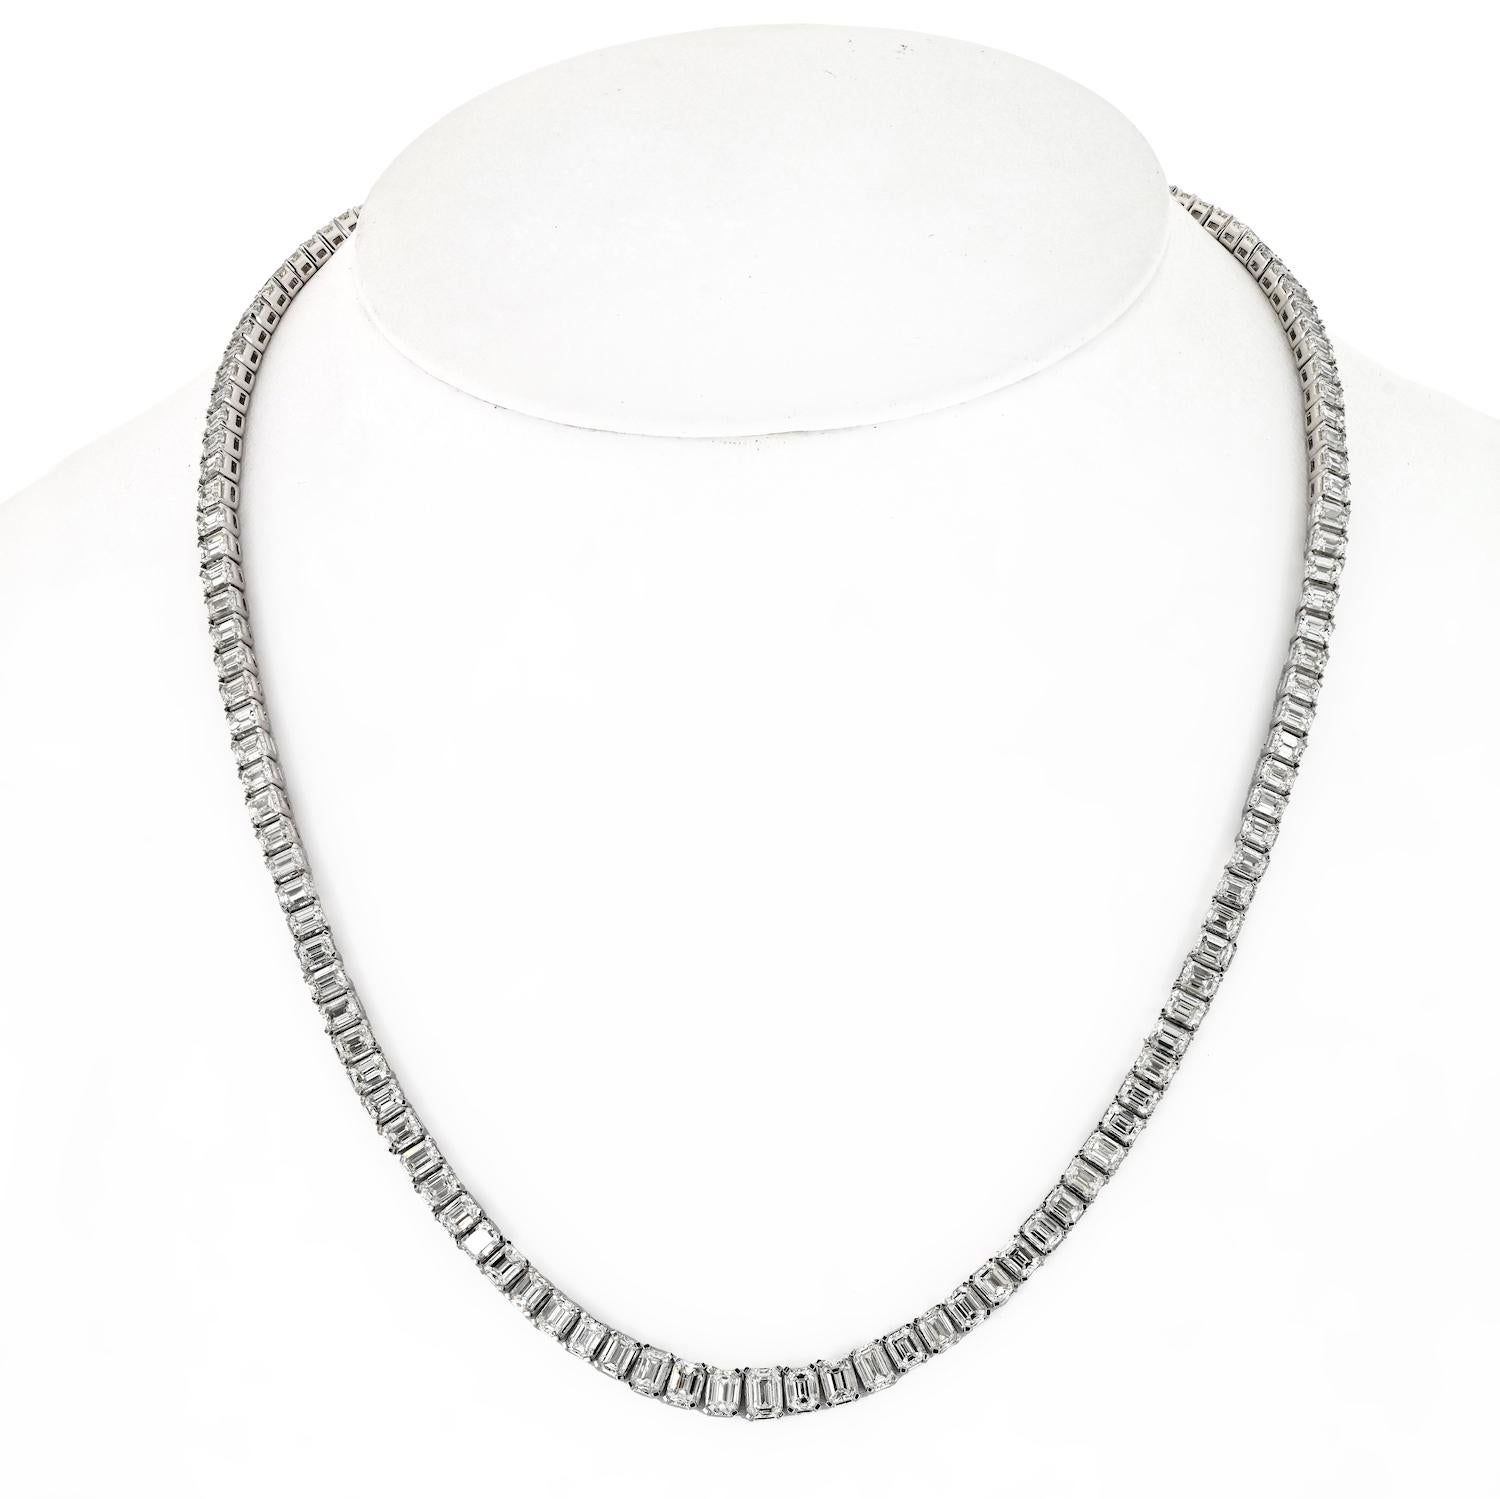 Elevate your elegance with our 18K White Gold 26.00cttw Emerald Cut Diamond Tennis Necklace, a true masterpiece of refined luxury. This exquisite piece boasts a captivating arrangement of 136 graduated emerald-cut diamonds, meticulously set to